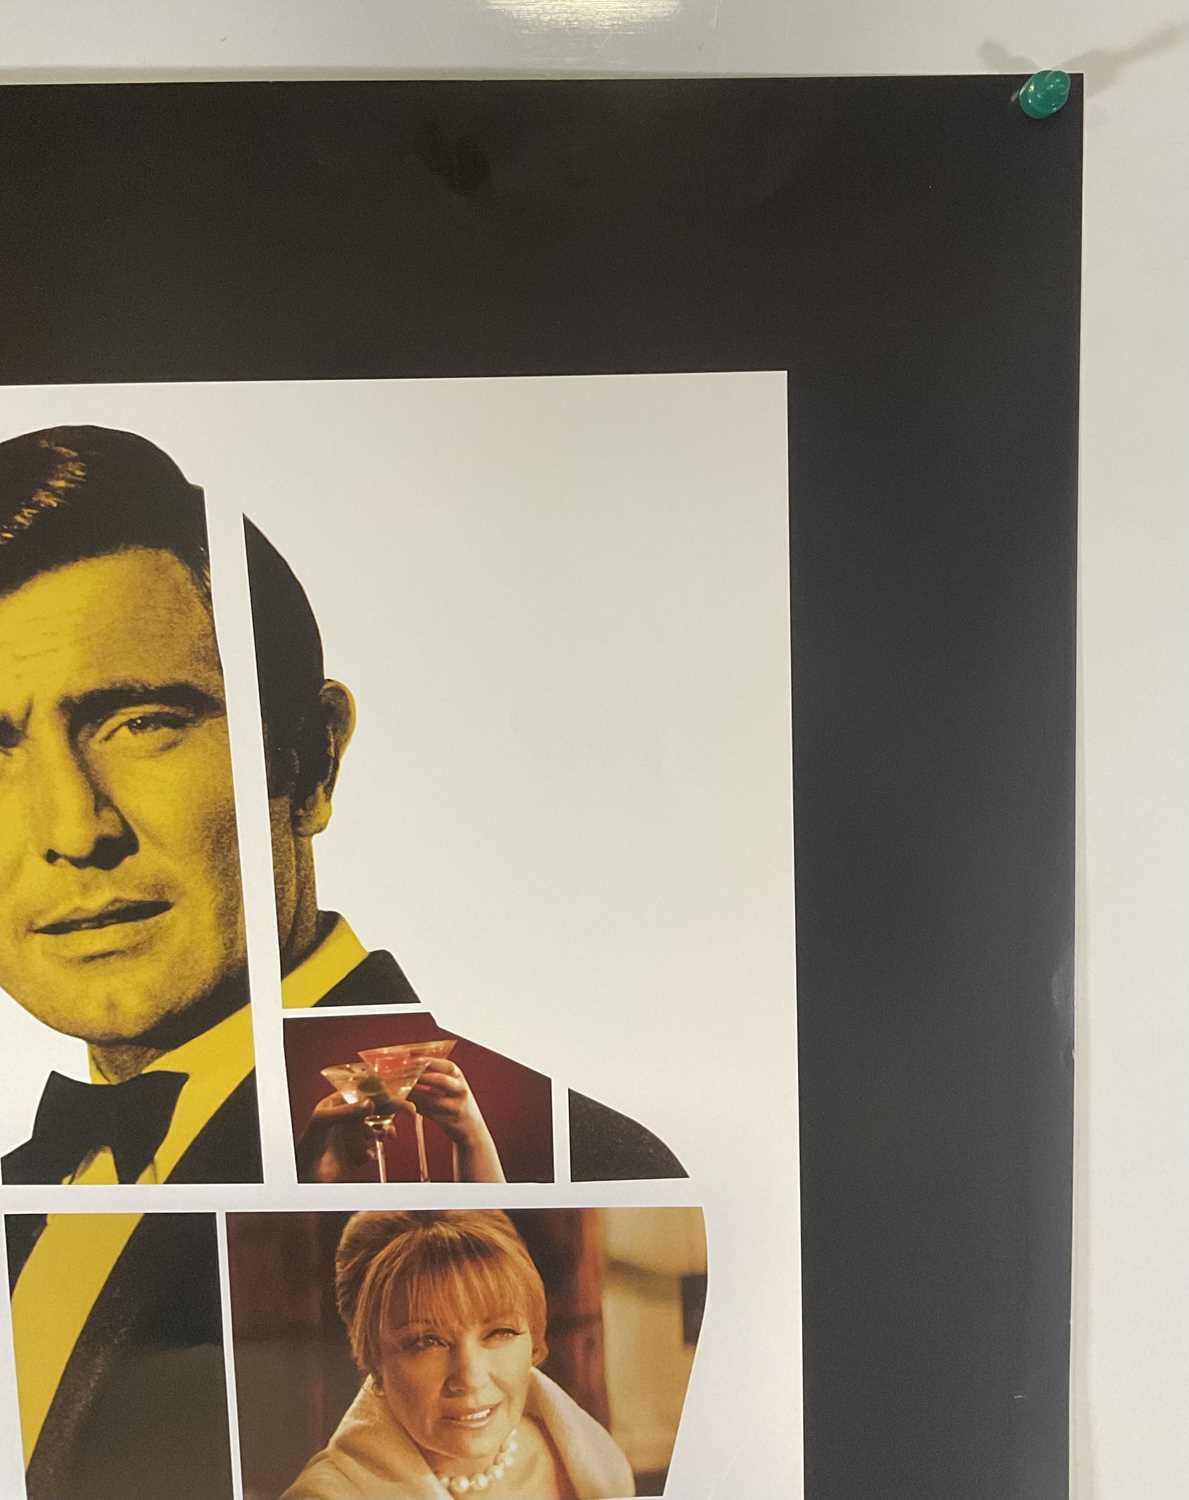 BECOMING BOND (2017) UK Quad poster for the Hulu documentary about George Lazenby, rolled - Image 3 of 5